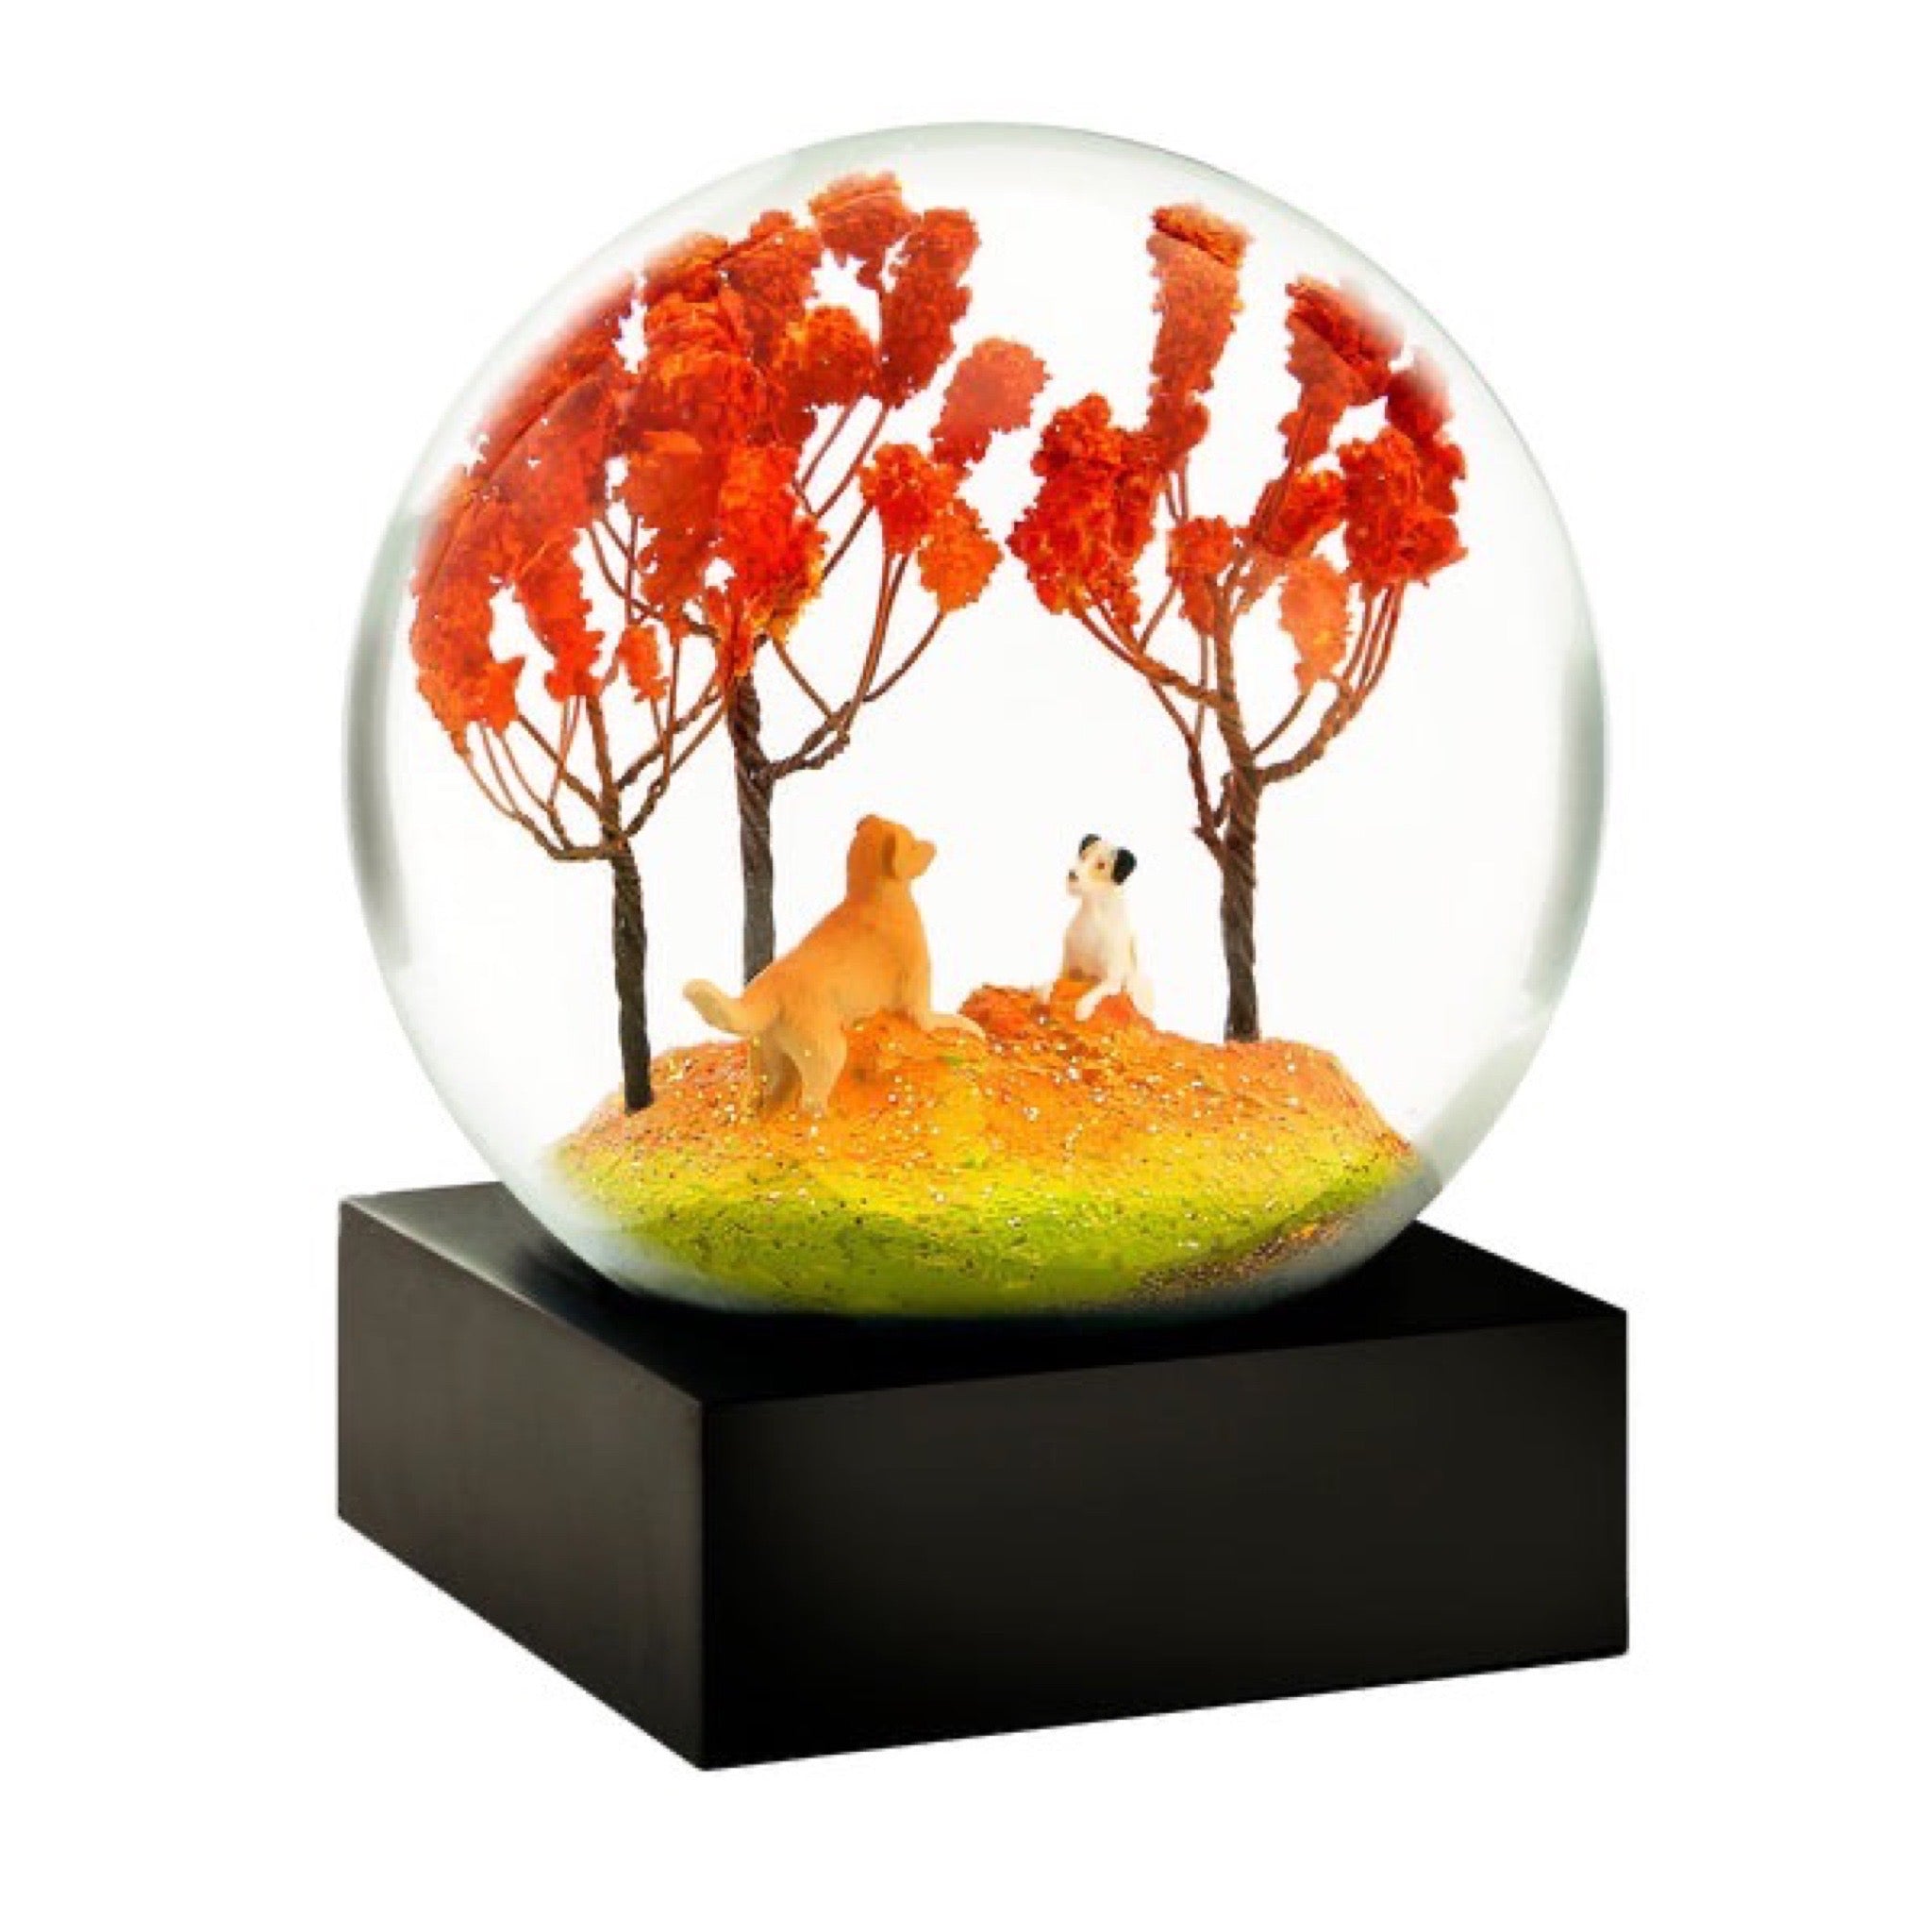 Cool Snow Globes Autumn Pals Snow Globe available at Shaylula Jewlery & Gifts in Tarrytown, NY and online. Everyone knows that a freshly raked pile of leaves is the ultimate Autumn playground. This charming snow globe features a Jack Russell Terrier and Golden Retriever ready to dive headlong into the mix; best friends at play on an autumn afternoon...  • 4.5" H x 4" D